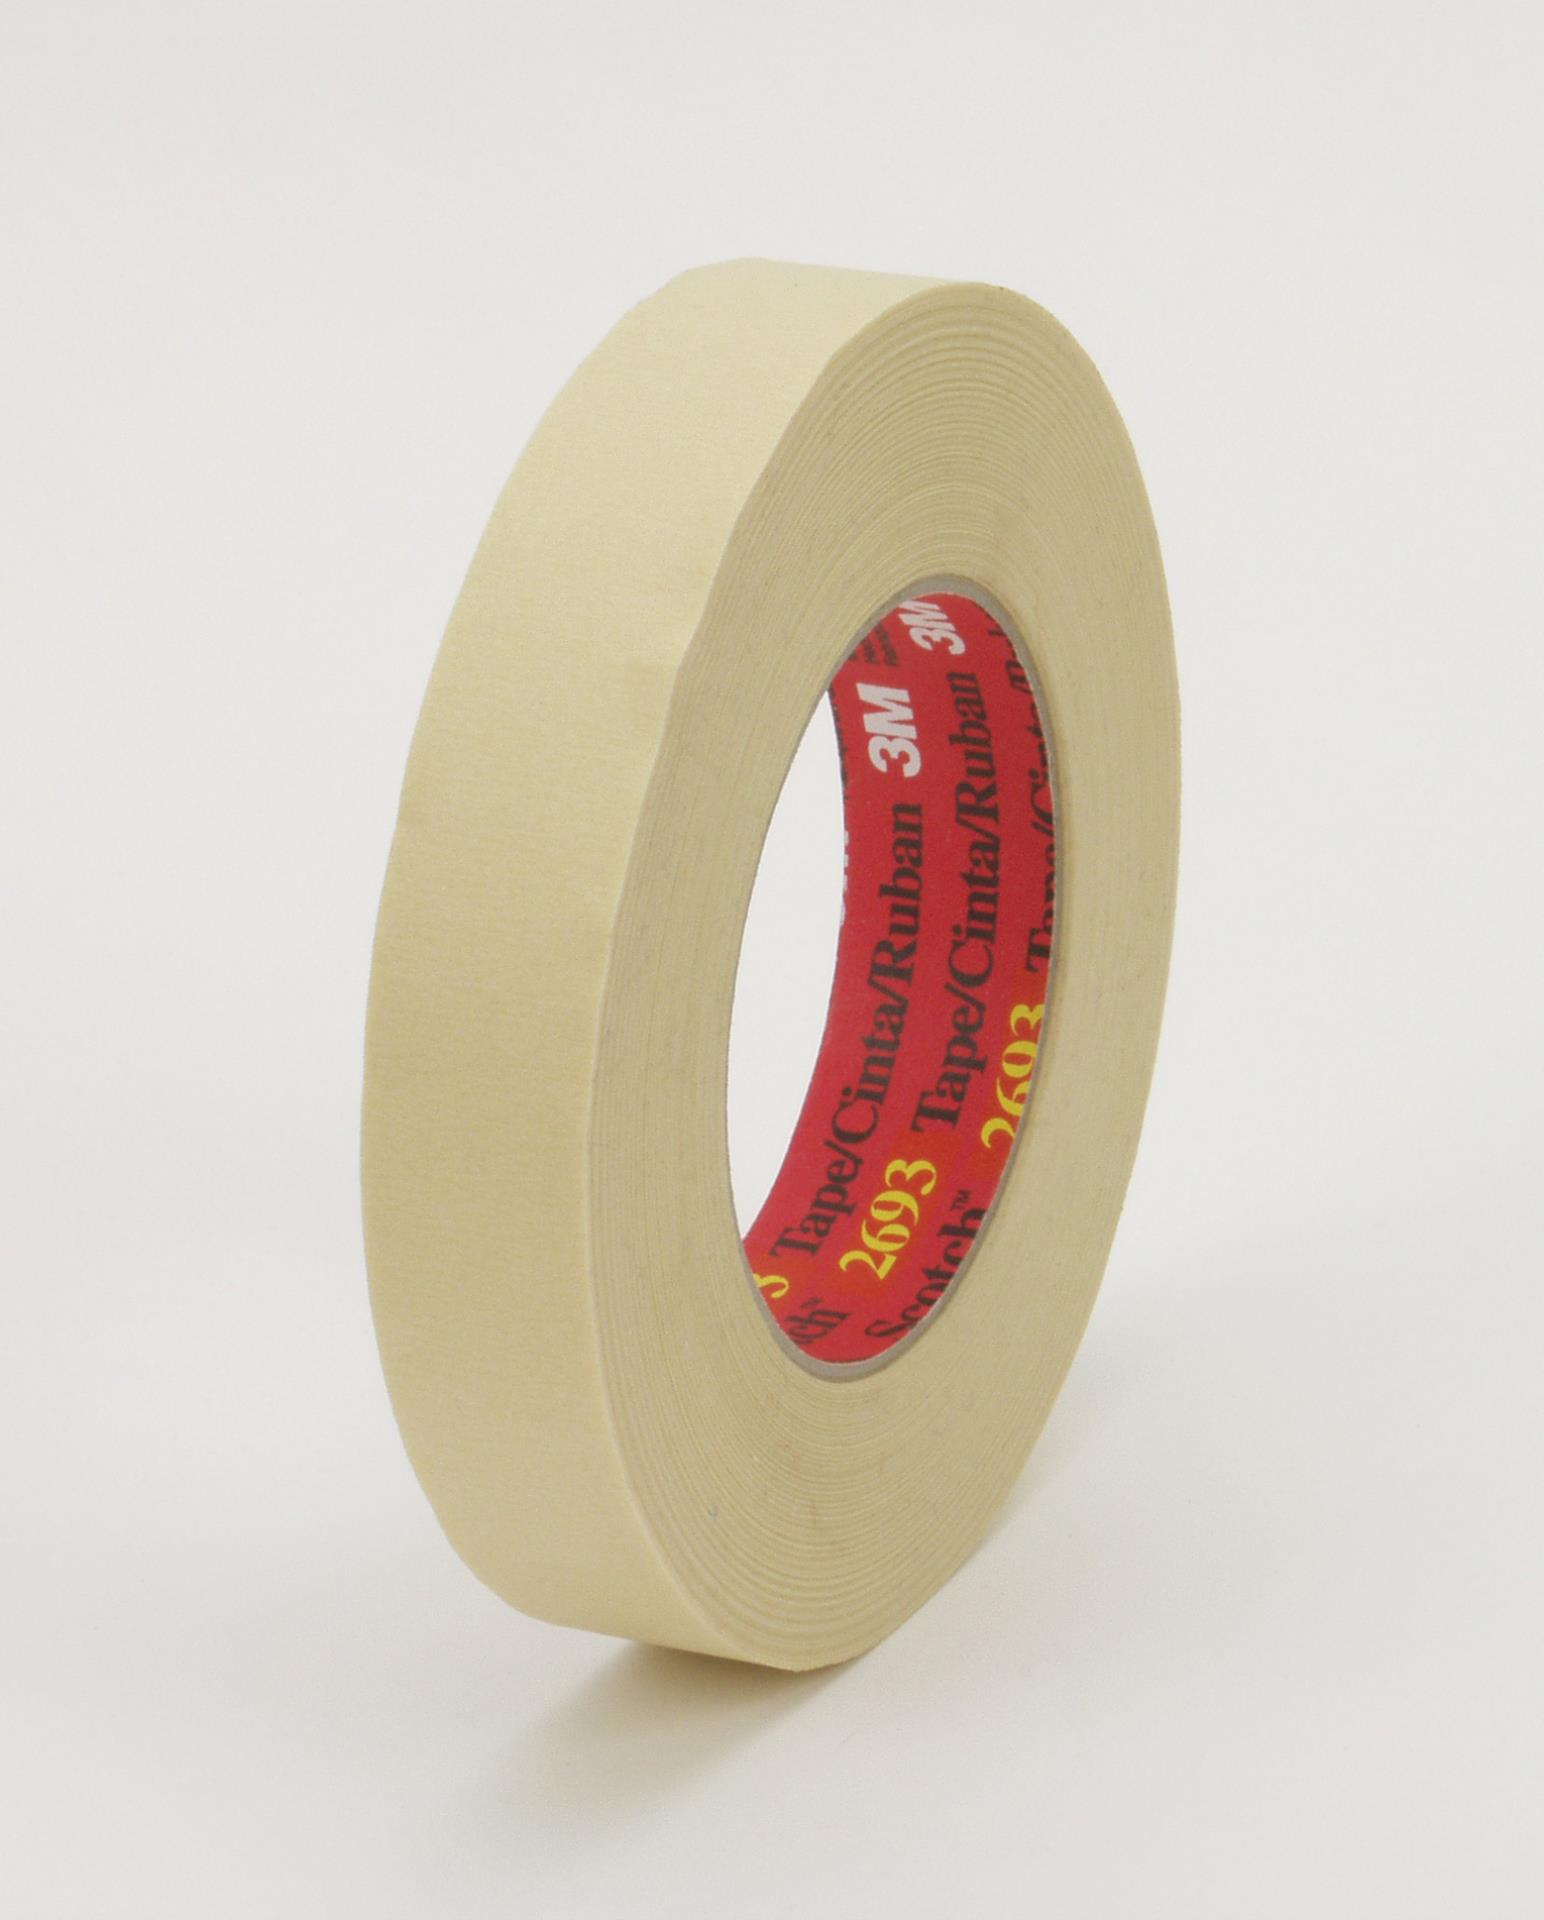 3M - Masking Tape: 96 mm Wide, 55 m Long, 6.3 mil Thick, Tan